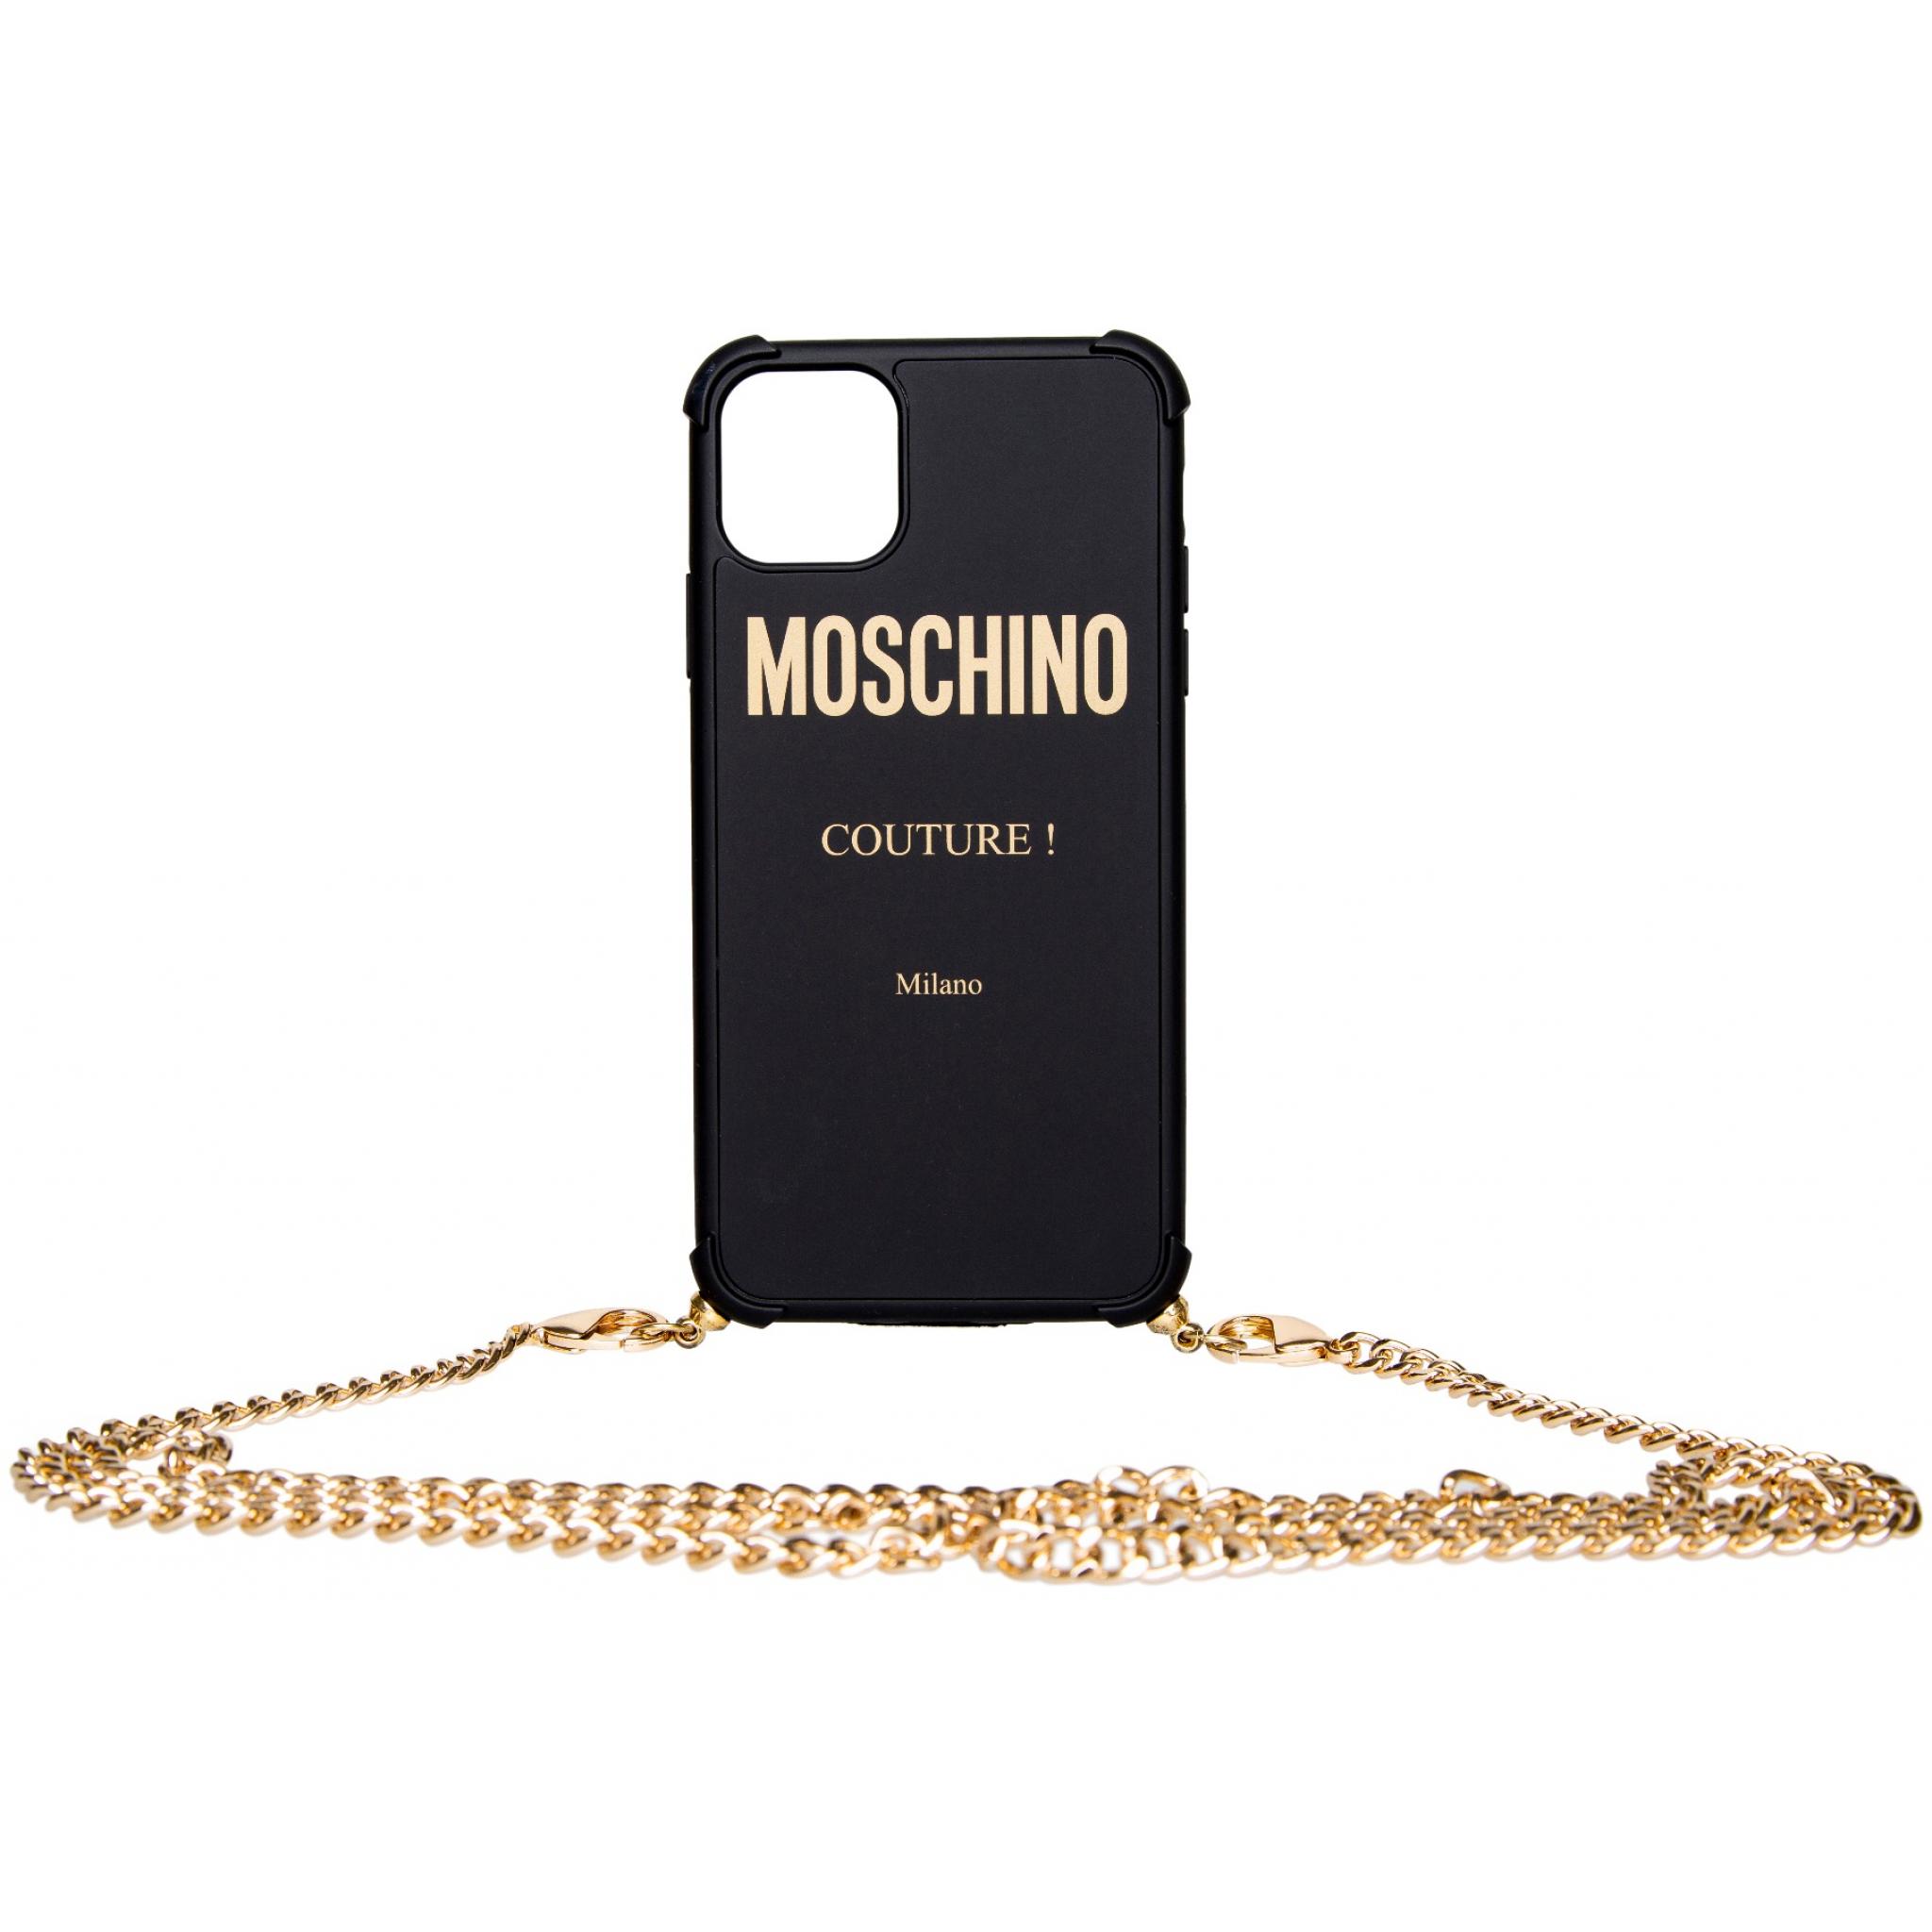 Case with chain strap for iPhone 11 Pro 